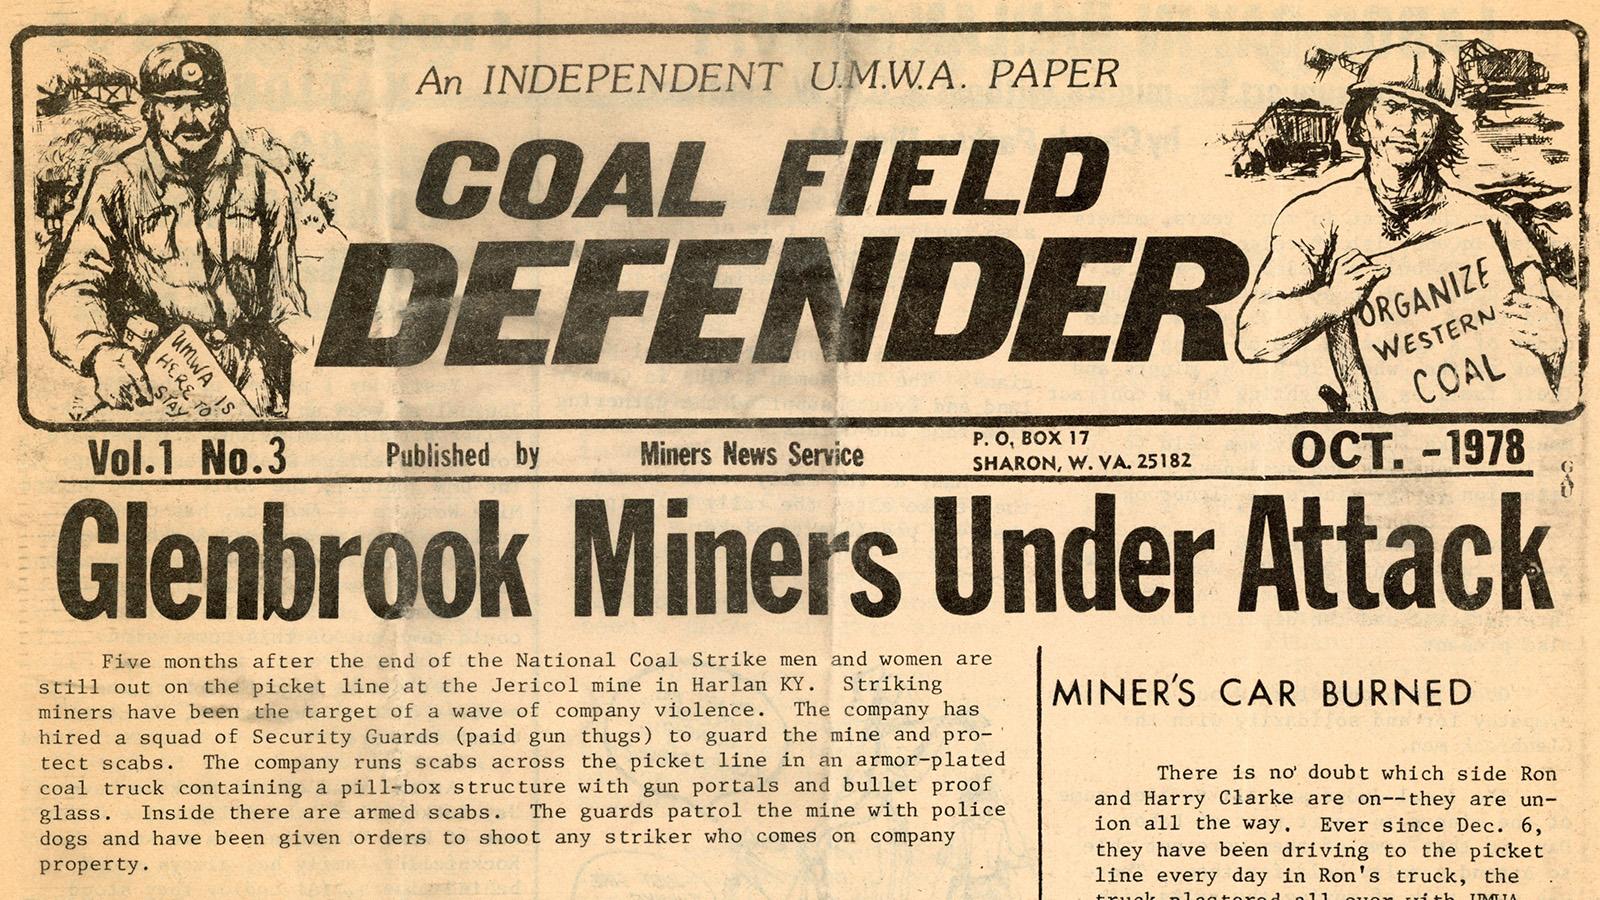 Front Page of the Newspaper of the United Mine Workers of America, the Coal Field Defender from October 1978 and part of Pat Mullen's Blue Ridge Parkway fieldwork. The headline reads "Glenbrook Miners Under Attack" and "Miner's Car Burned"